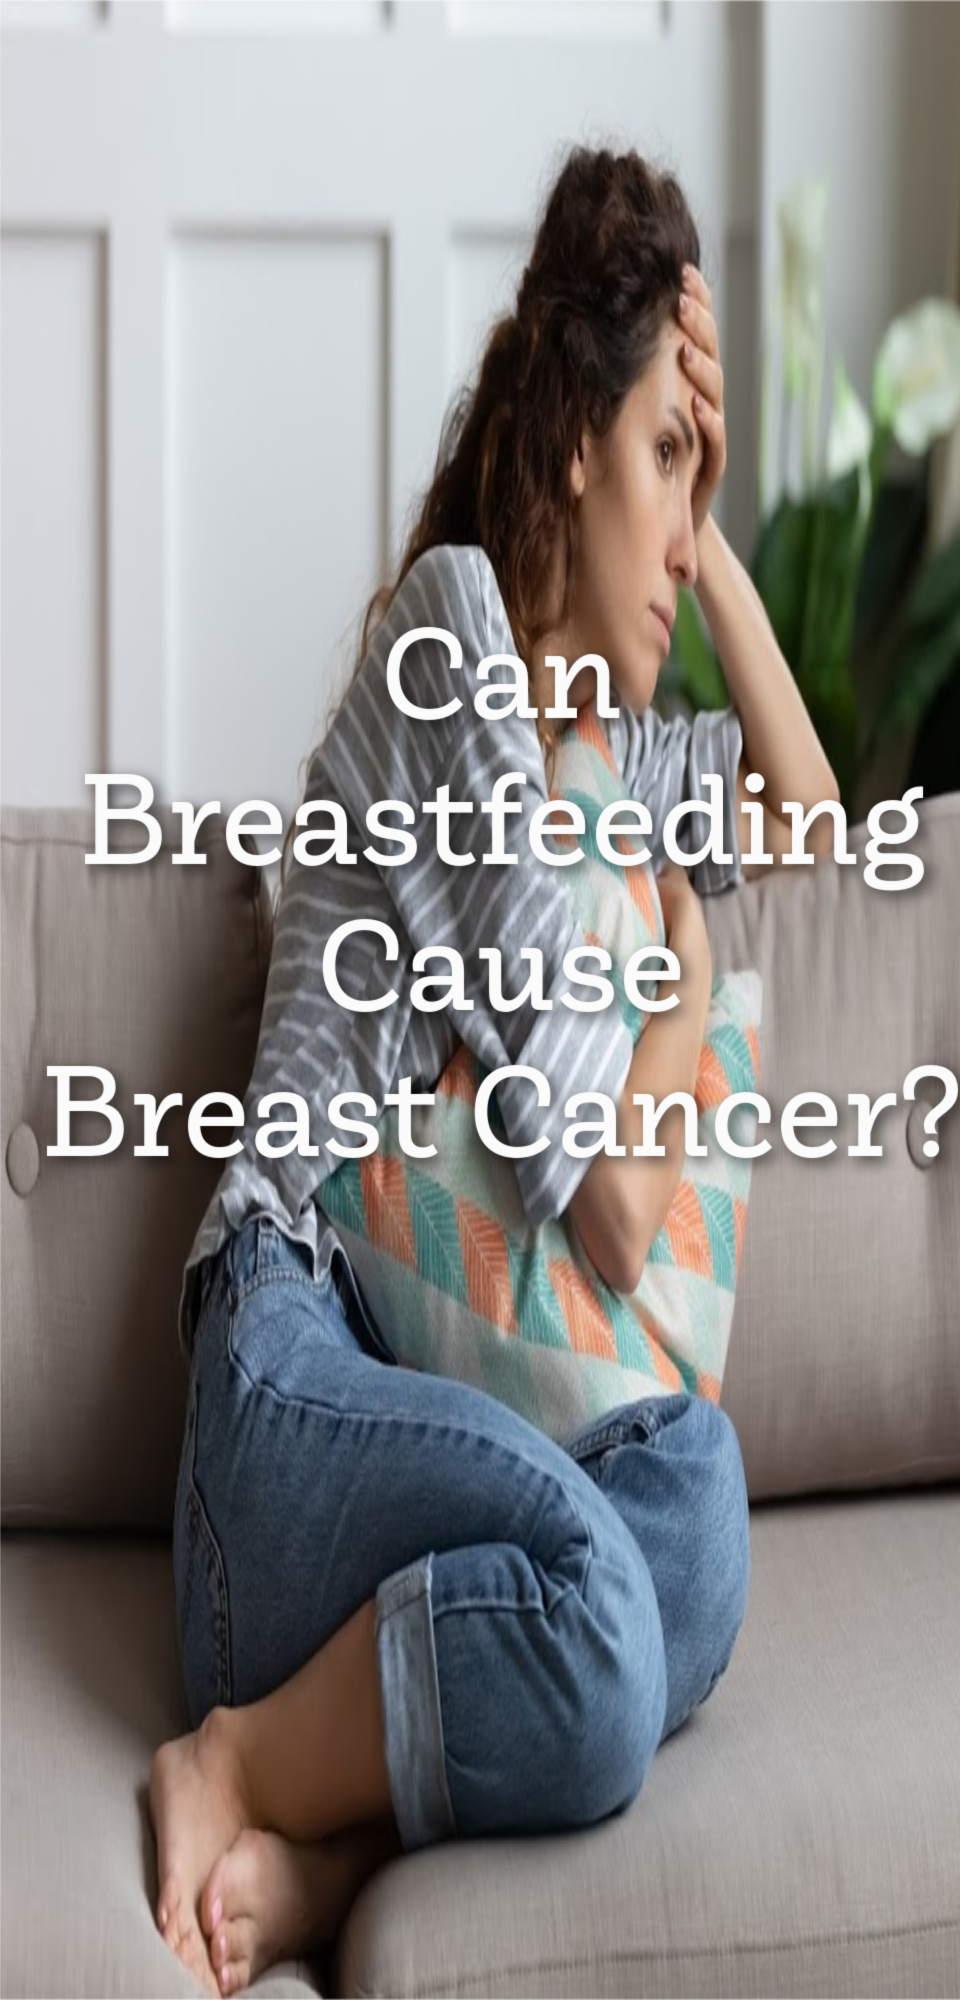 Can Breastfeeding Cause Breast Cancer?